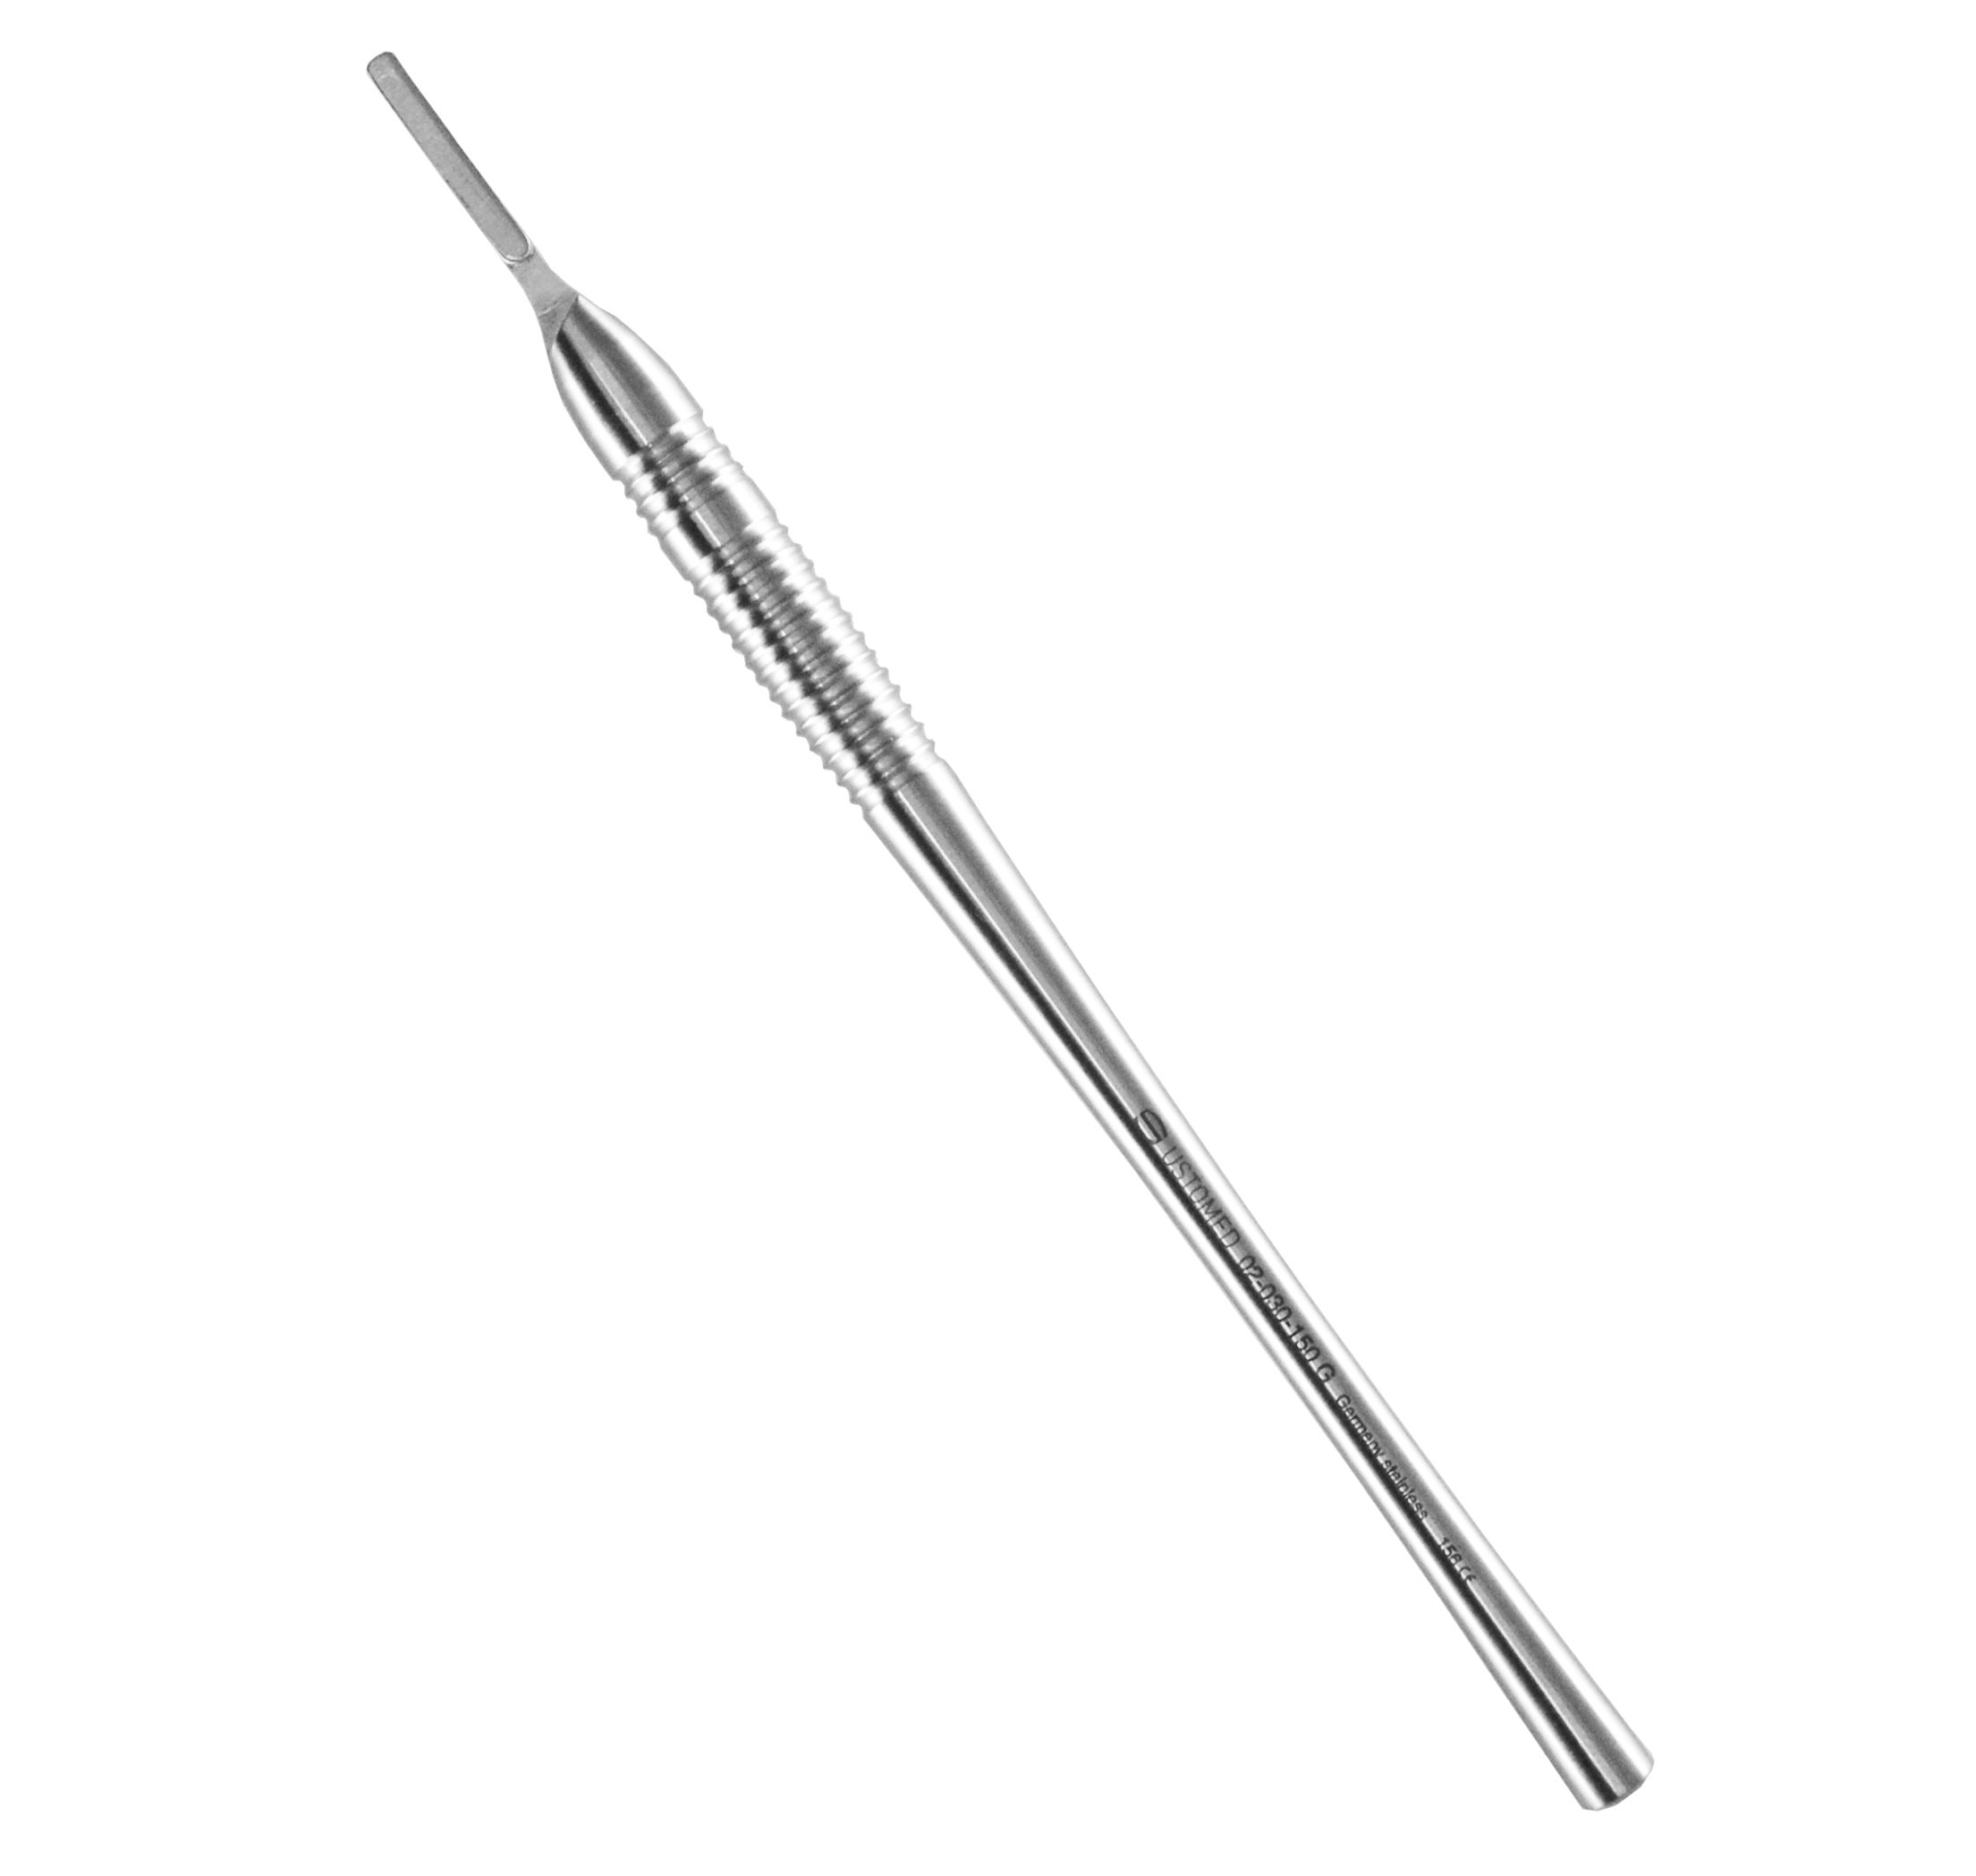 Scalpel handle, 15 cm, round shaped, smooth